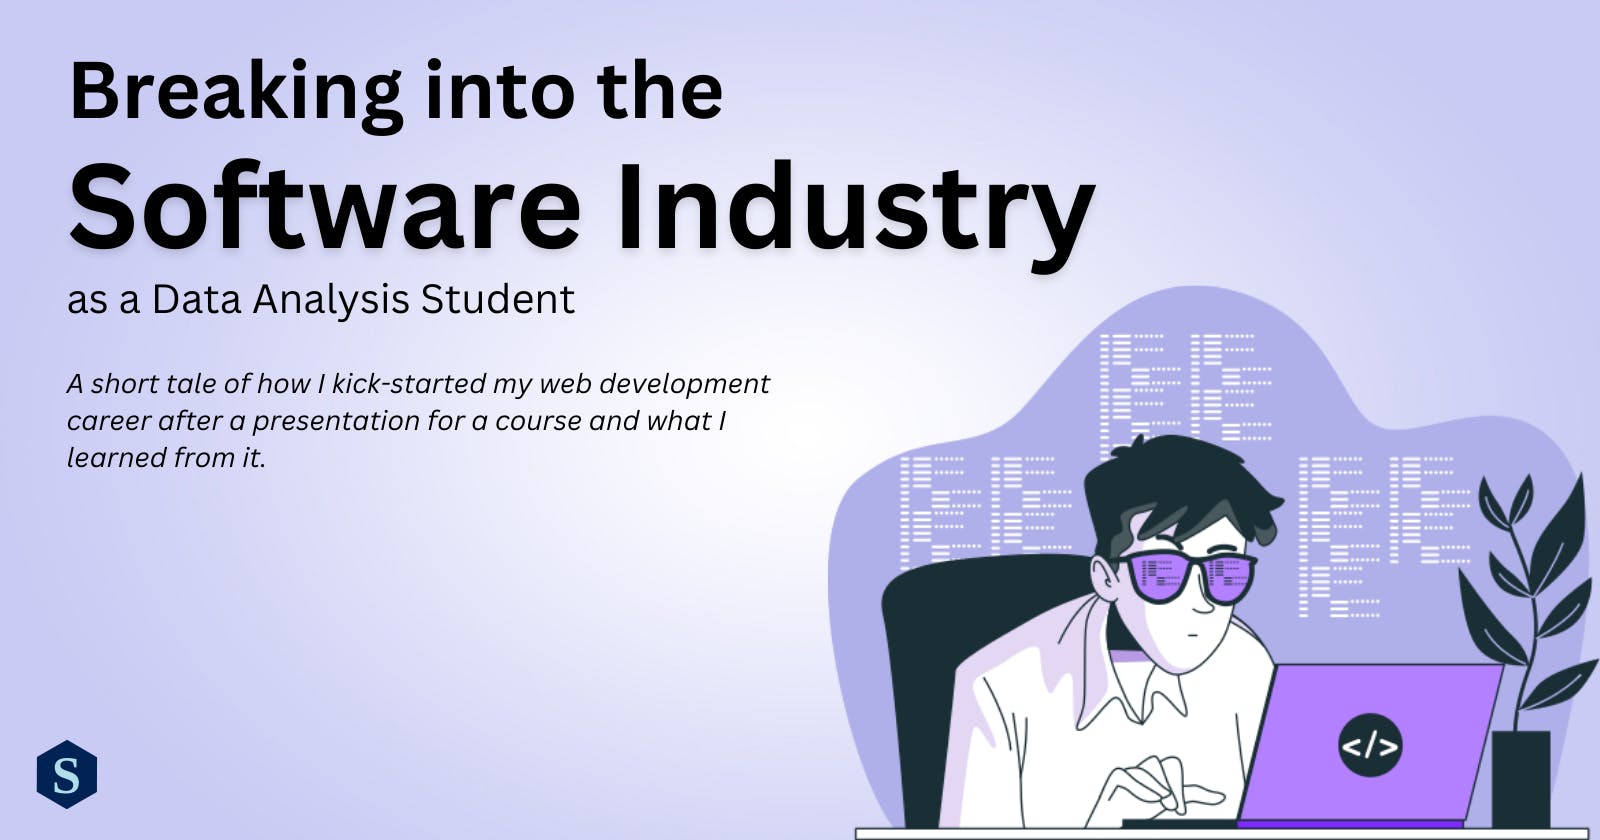 Breaking into the Software Industry as a Data Analysis Student